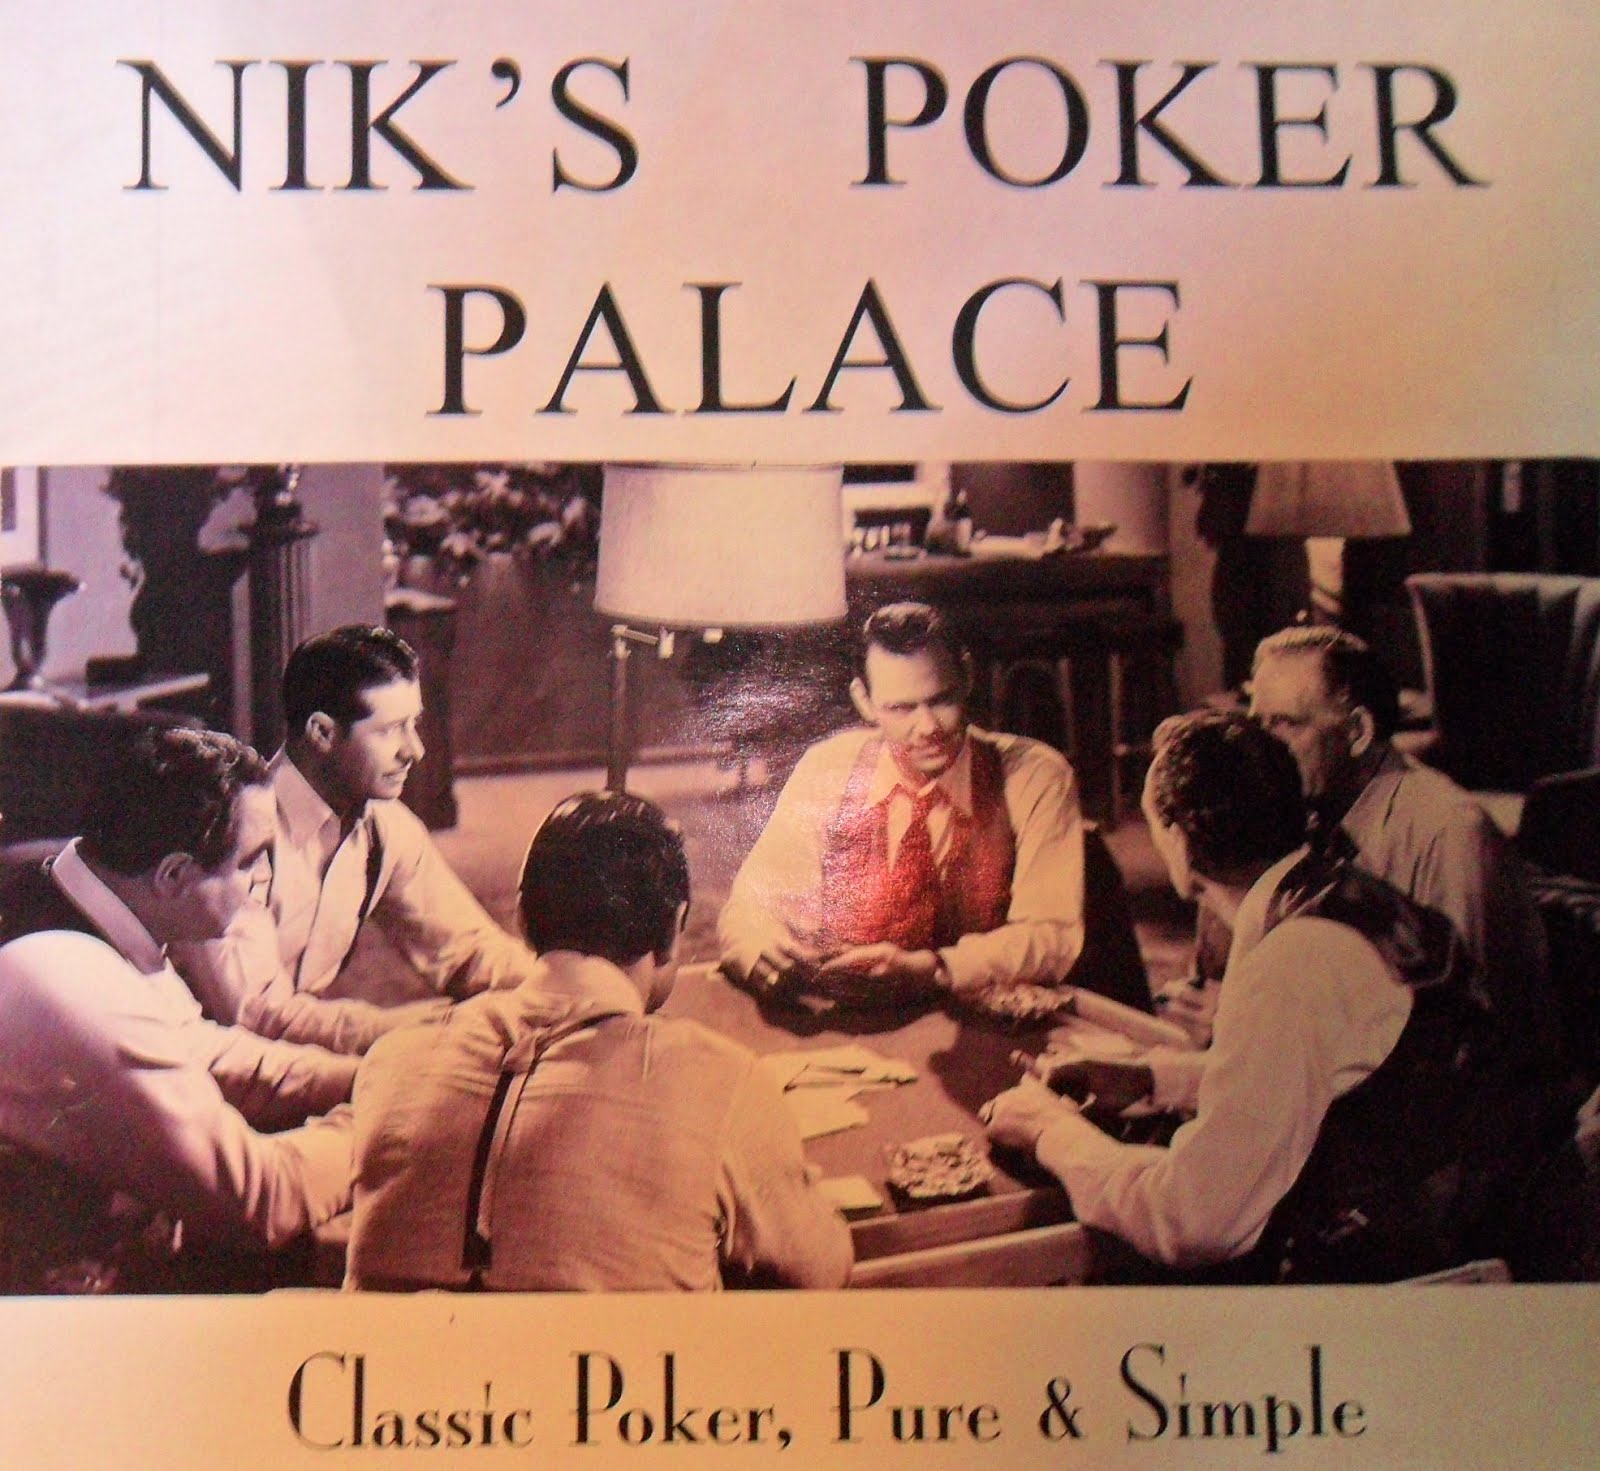 Welcome to Nik's Poker Palace!